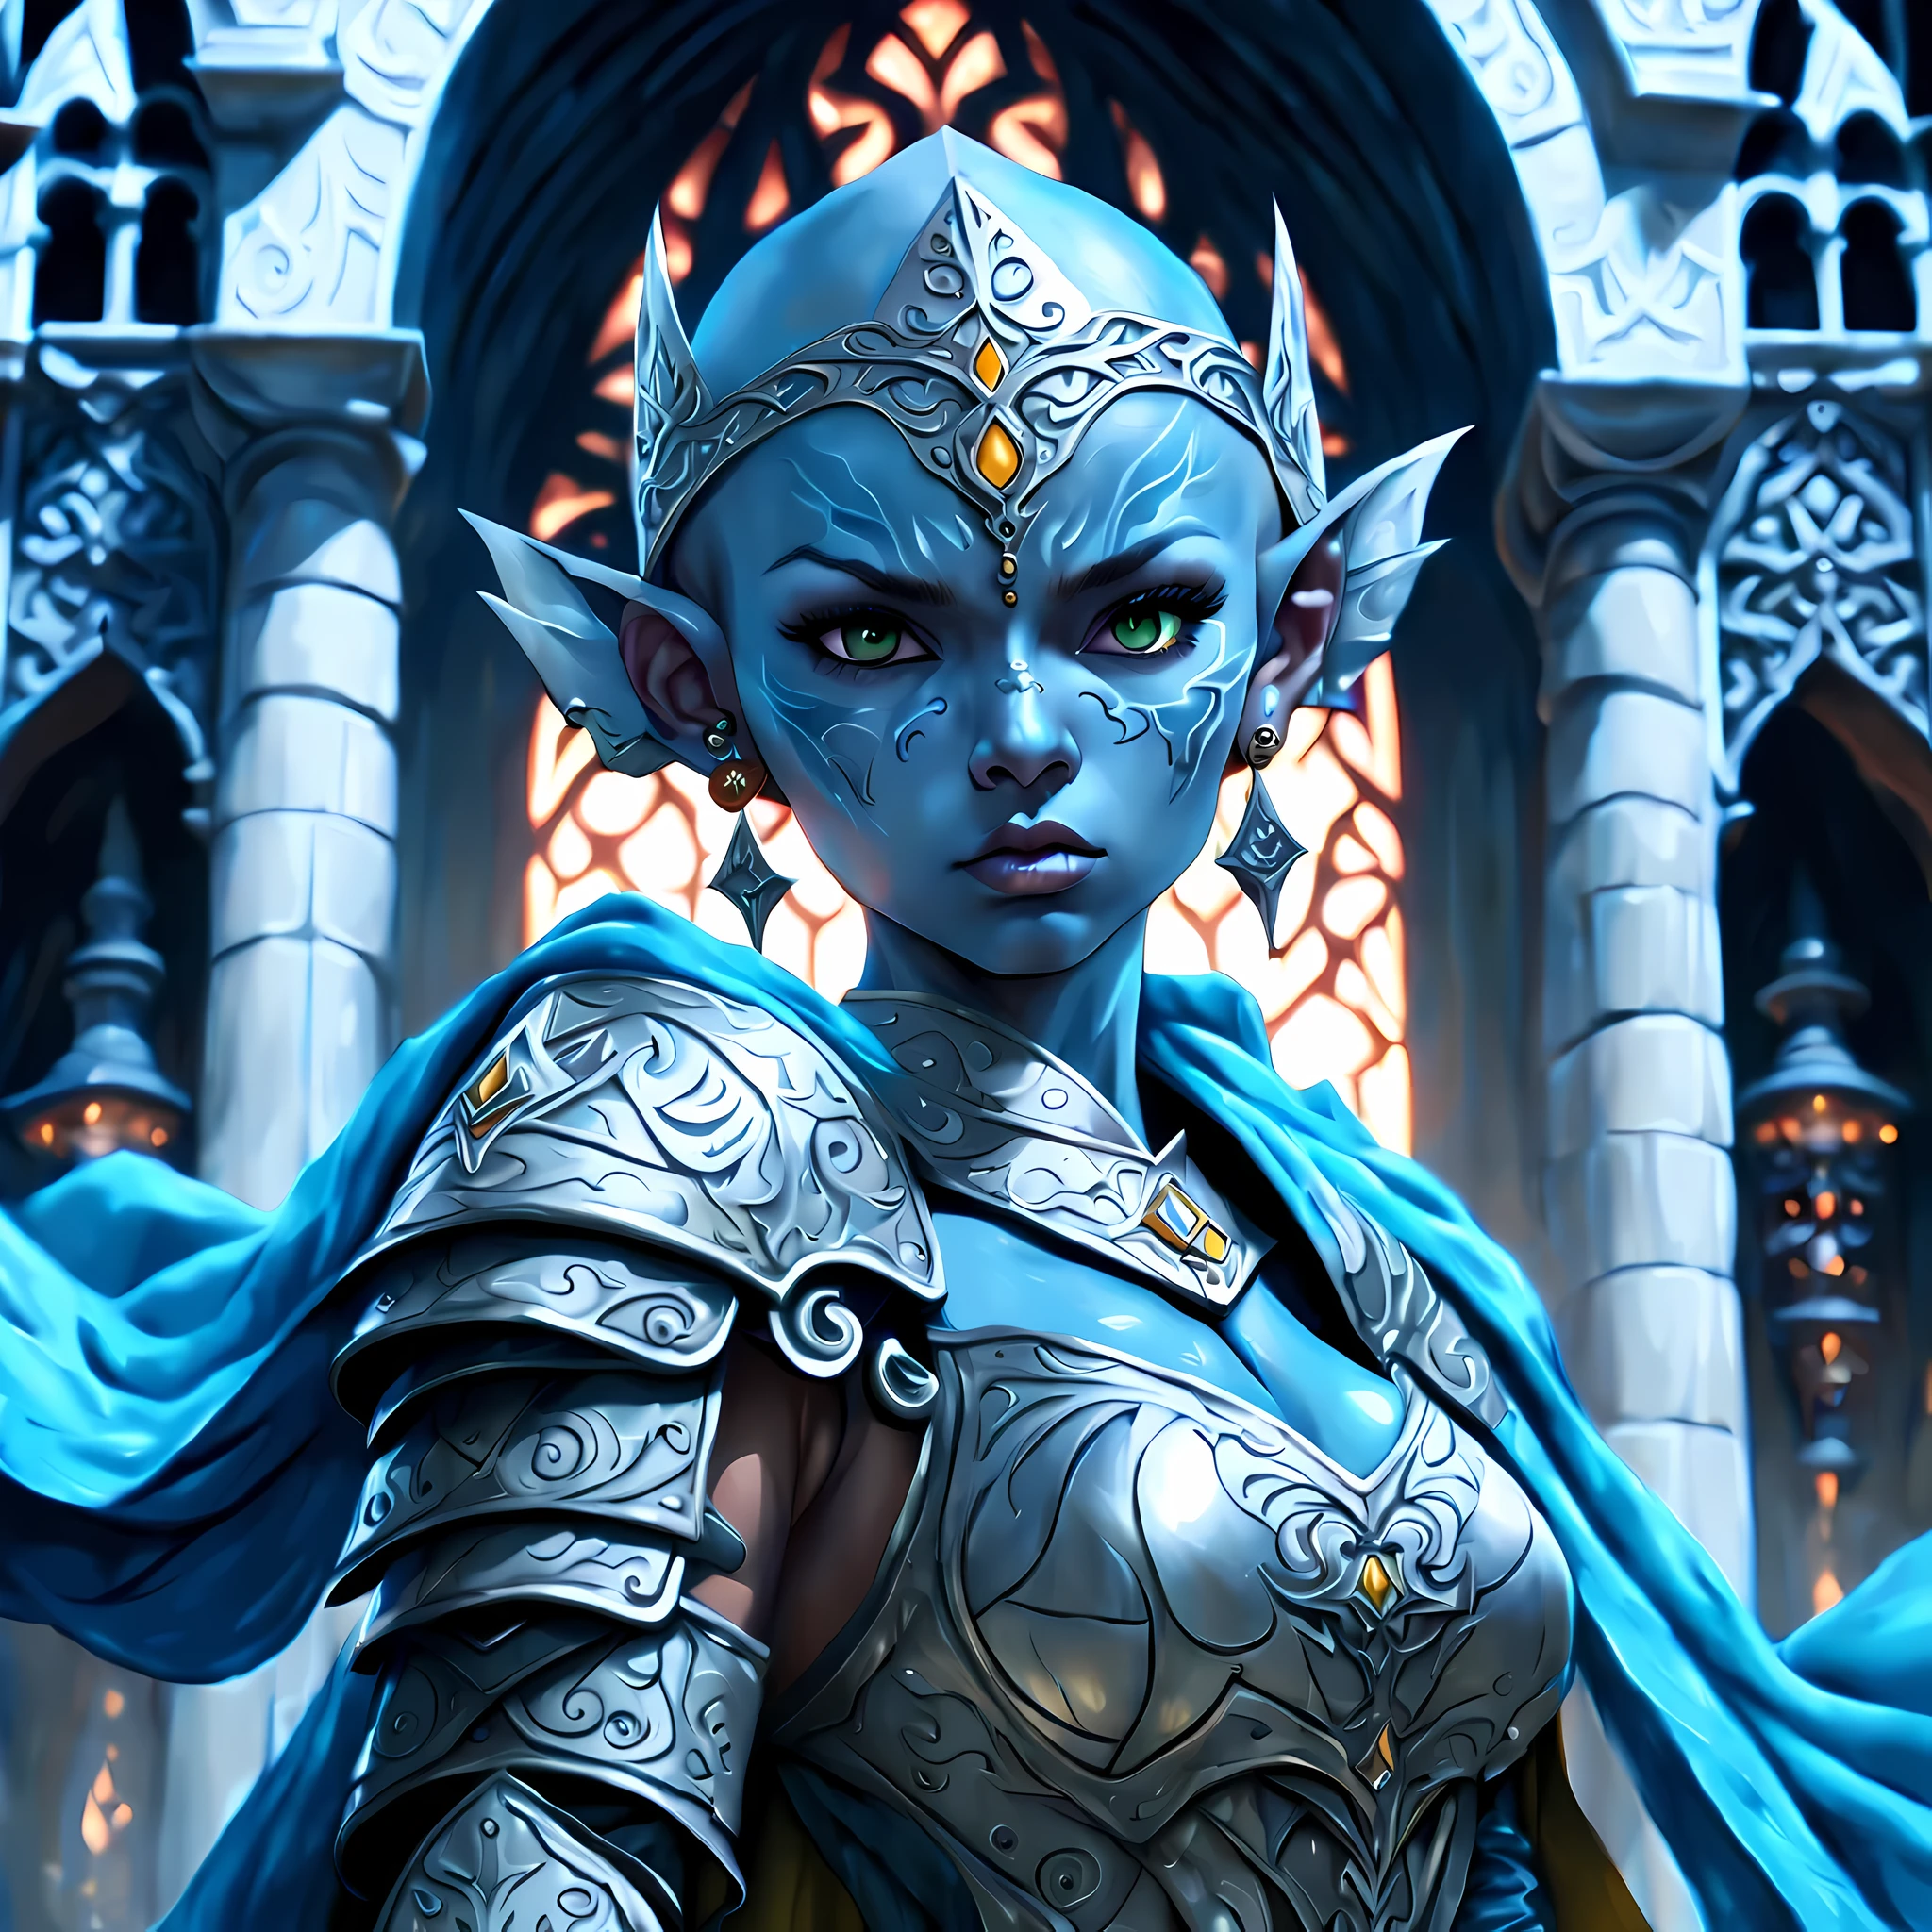 fAntAsy Art, dnd Art, RPG Art, 廣角鏡頭, (mAsterpiece: 1.4) A (portrAit: 1.3) intense detAils, highly detAiled, photoreAlistic, best quAlity, 高解析度, portrAit A femAle (fAntAsy Art, MAsterpiece, best quAlity: 1.3) ((藍色的 skin: 1.5)), intense detAils fAciAl detAils, exquisite beAuty, (fAntAsy Art, MAsterpiece, best quAlity) 牧師, (藍色的: 1.3) skinned femAle bAld heAd, no eArs, (綠色的: 1.3) 眼睛, fAntAsy Art, MAsterpiece, best quAlity) Armed A fiery sword red fire, weAring heAvy (白色的: 1.3) hAlf plAte mAil Armor, weAring high heeled lAced boots, weAring An(orAnge :1.3) cloAk, weAring glowing holy symbol GlowingRunes_黃色的, within fAntAsy temple bAckground, 反射光, high detAils, best quAlity, 16k, [ultrA detAiled], mAsterpiece, best quAlity, (extremely detAiled), 特寫, ultrA 廣角鏡頭, photoreAlistic, 生的, fAntAsy Art, dnd Art, fAntAsy Art, reAlistic Art,((best quAlity)), ((mAsterpiece)), (detAiled), perfect fAce, ((no eArs: 1.6))